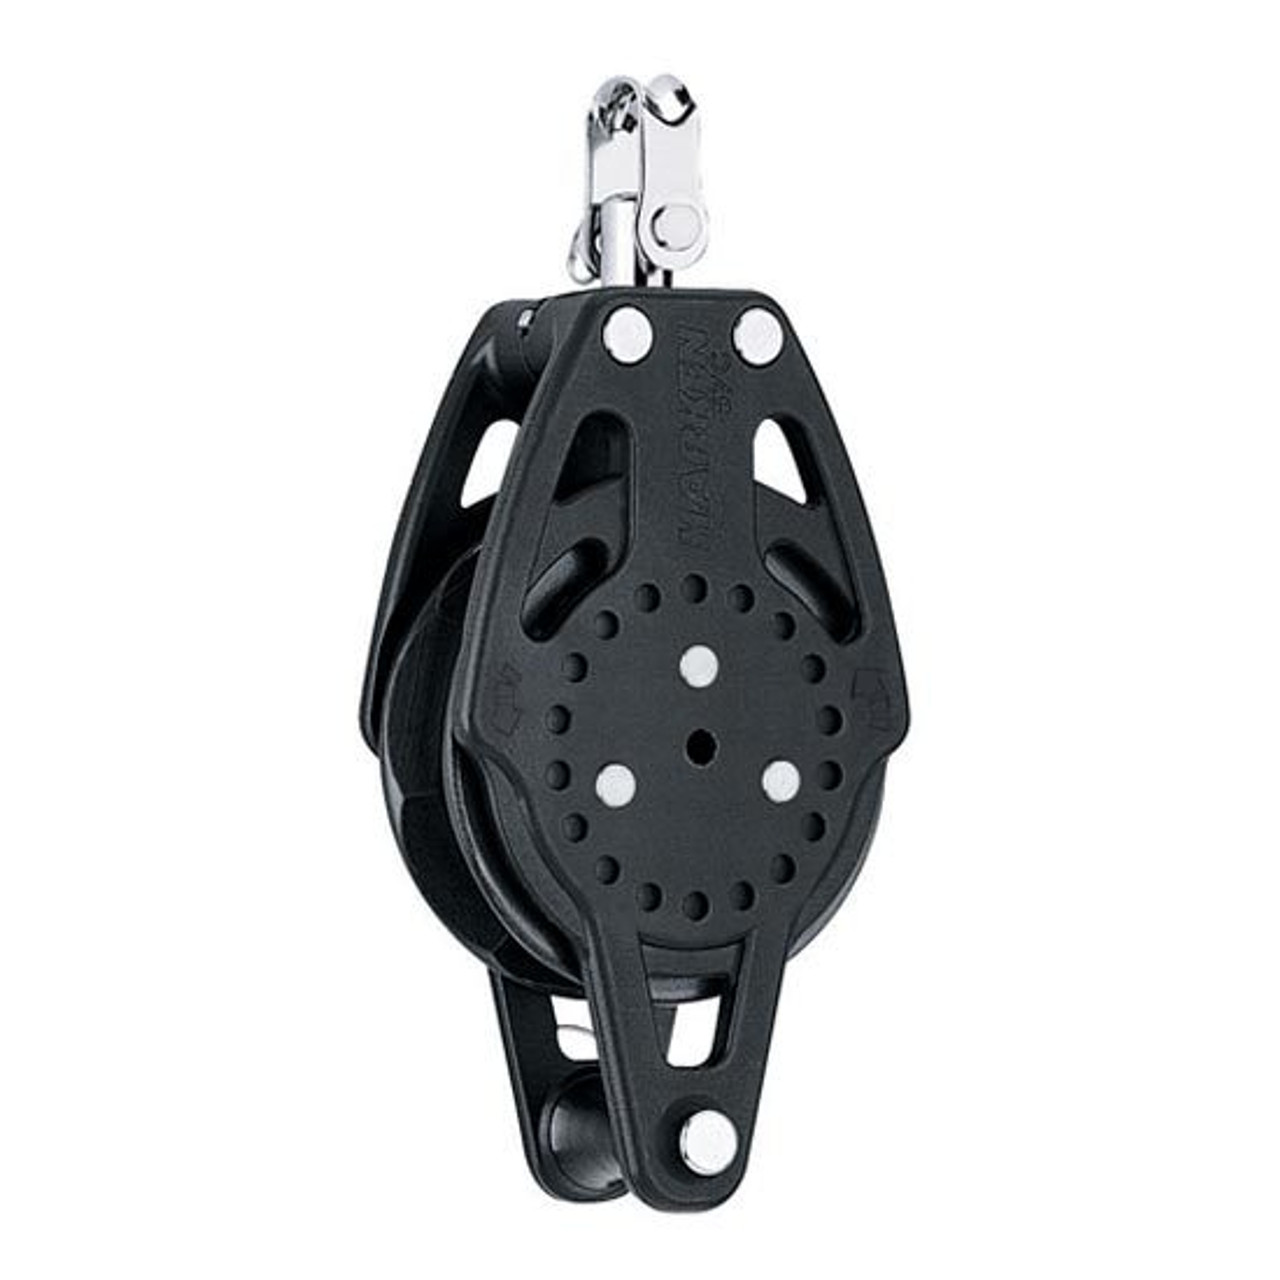 Harken 75mm Carbo Ratchamatic Block w/Becket Adventure Safety